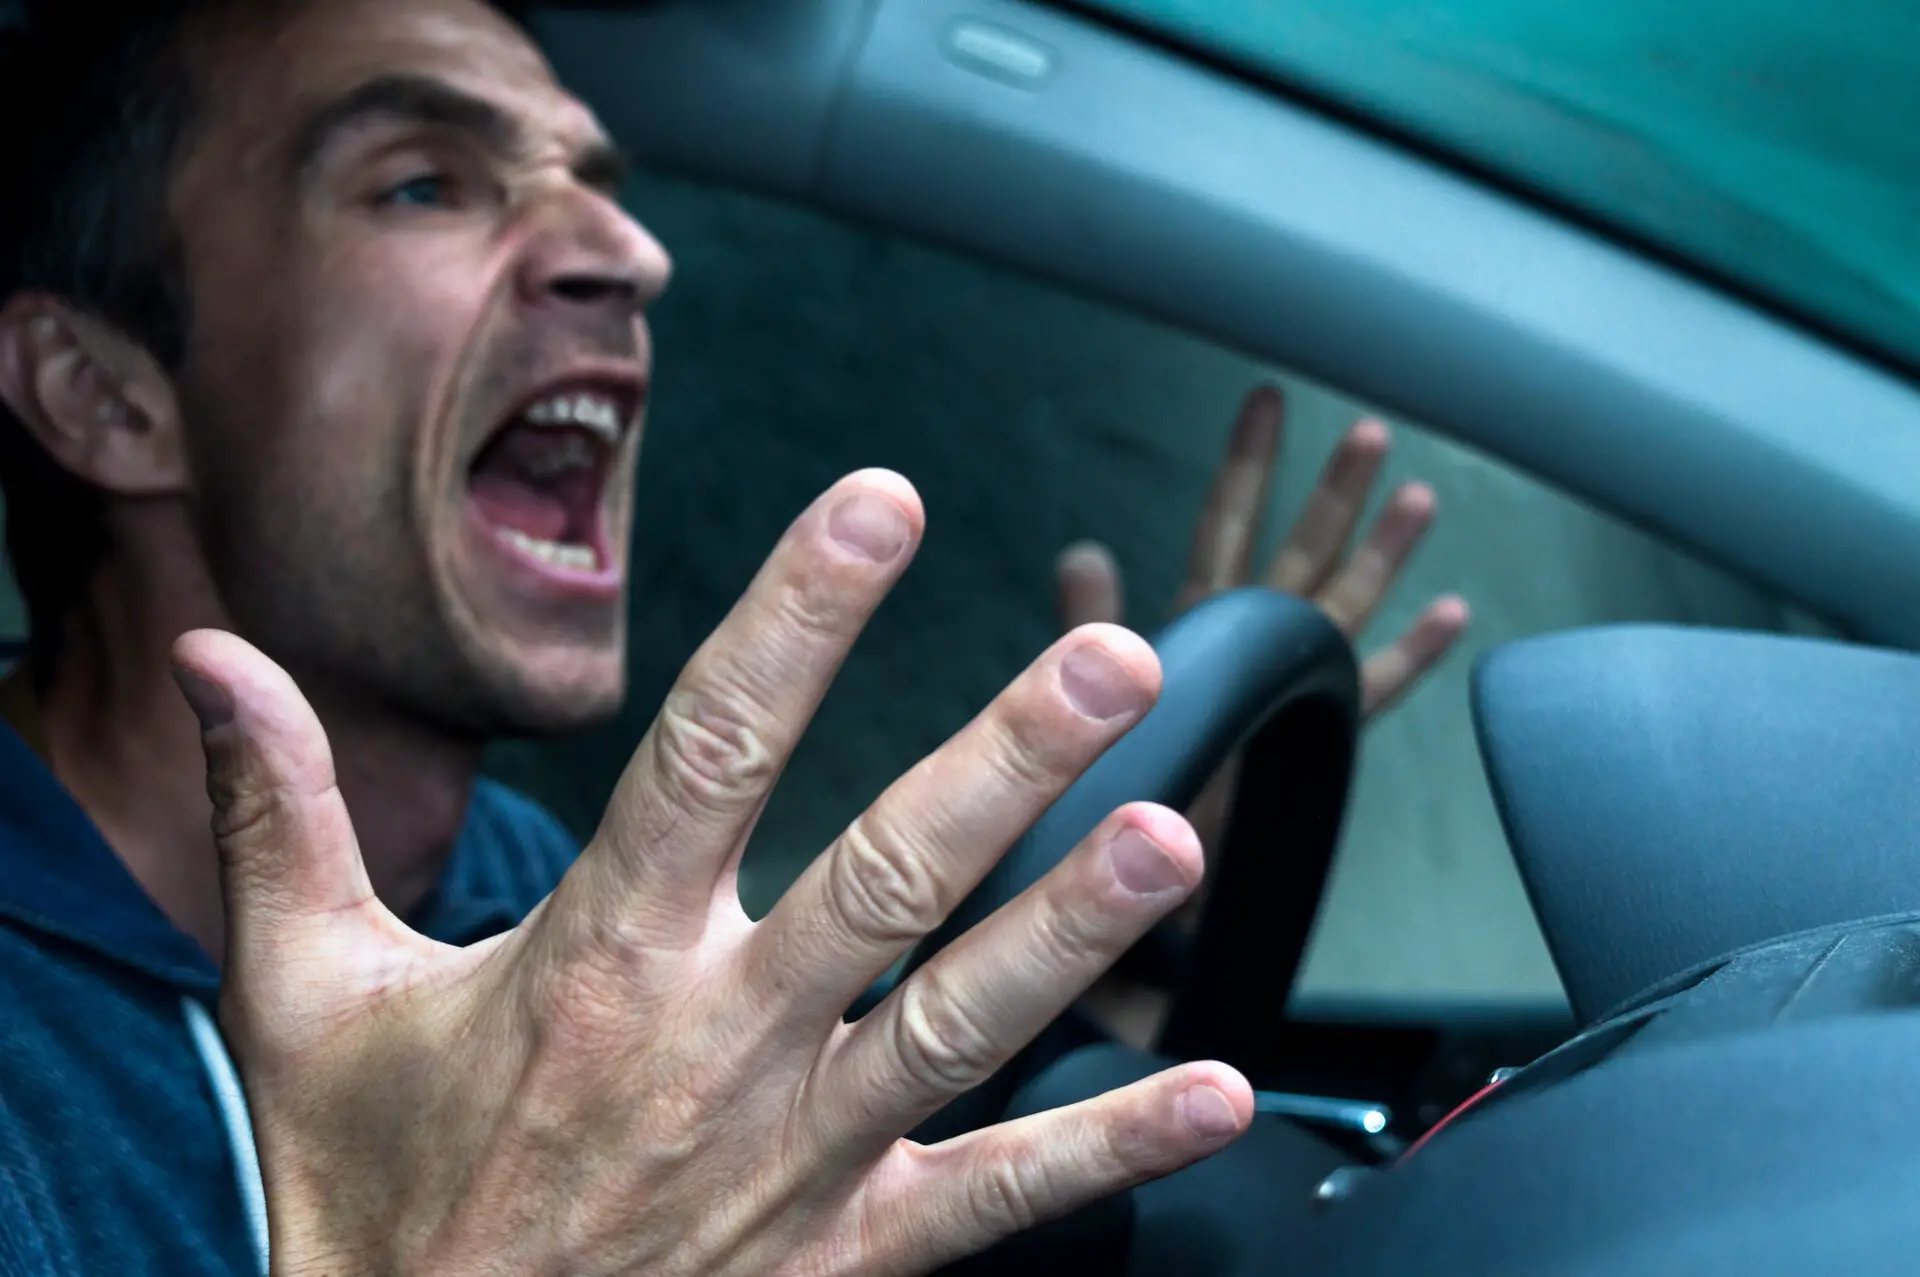 A man yelling while driving